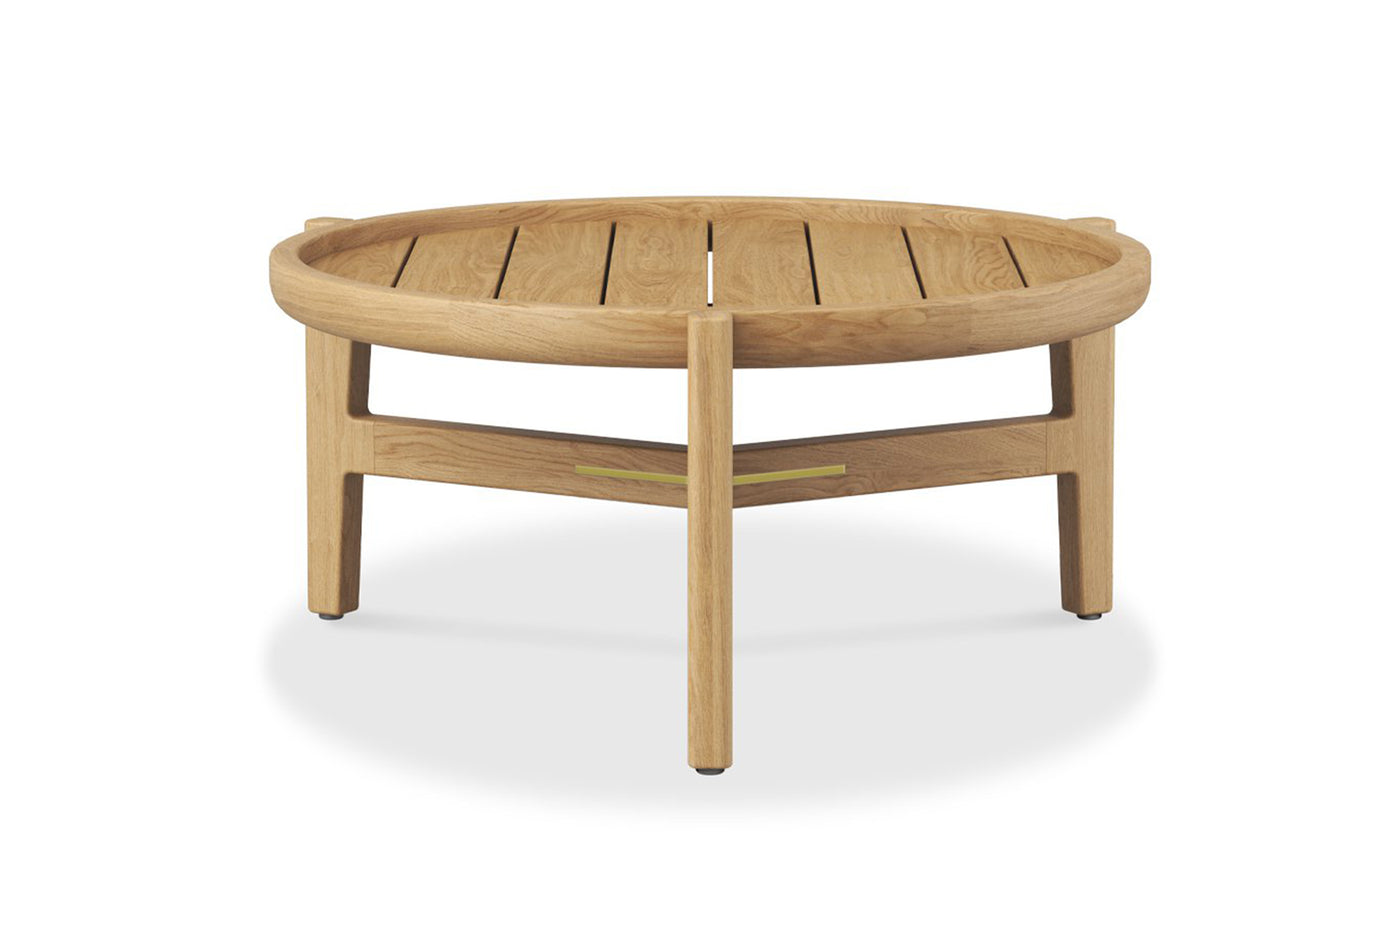 Rockcliffe Outdoor Round Coffee Table - Low - 60cm